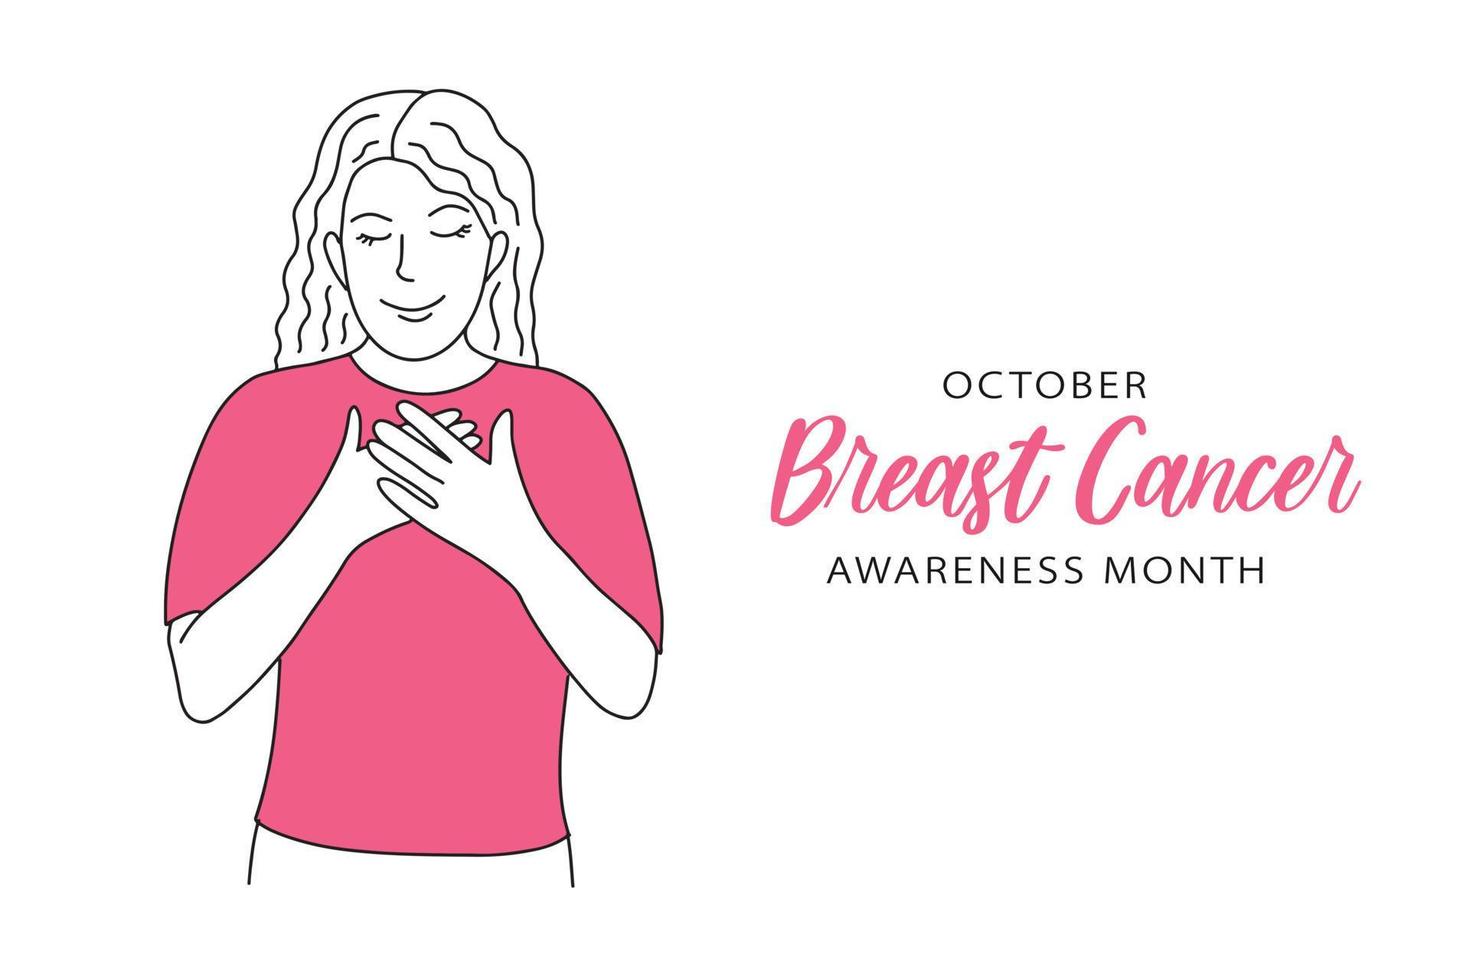 Breast Cancer Awareness Month October banner Happy confident woman with hands on chest, closed eyes, grateful gesture. Vector hand drawn style simple contour line drawing of female cancer oncology